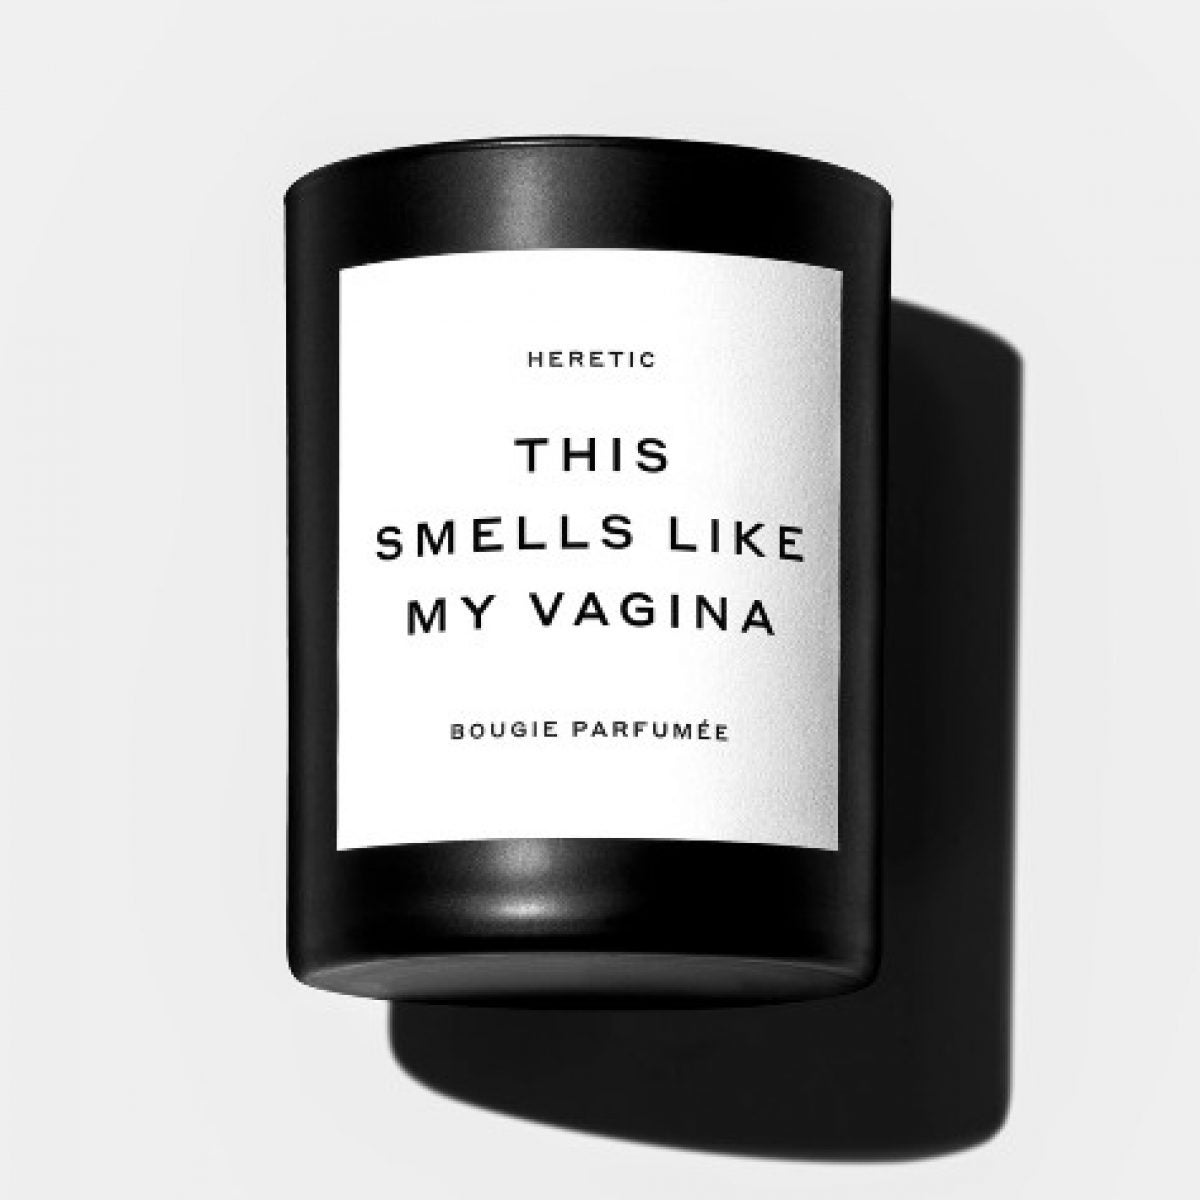 Is Vagina The Hottest New Scent For 2020?